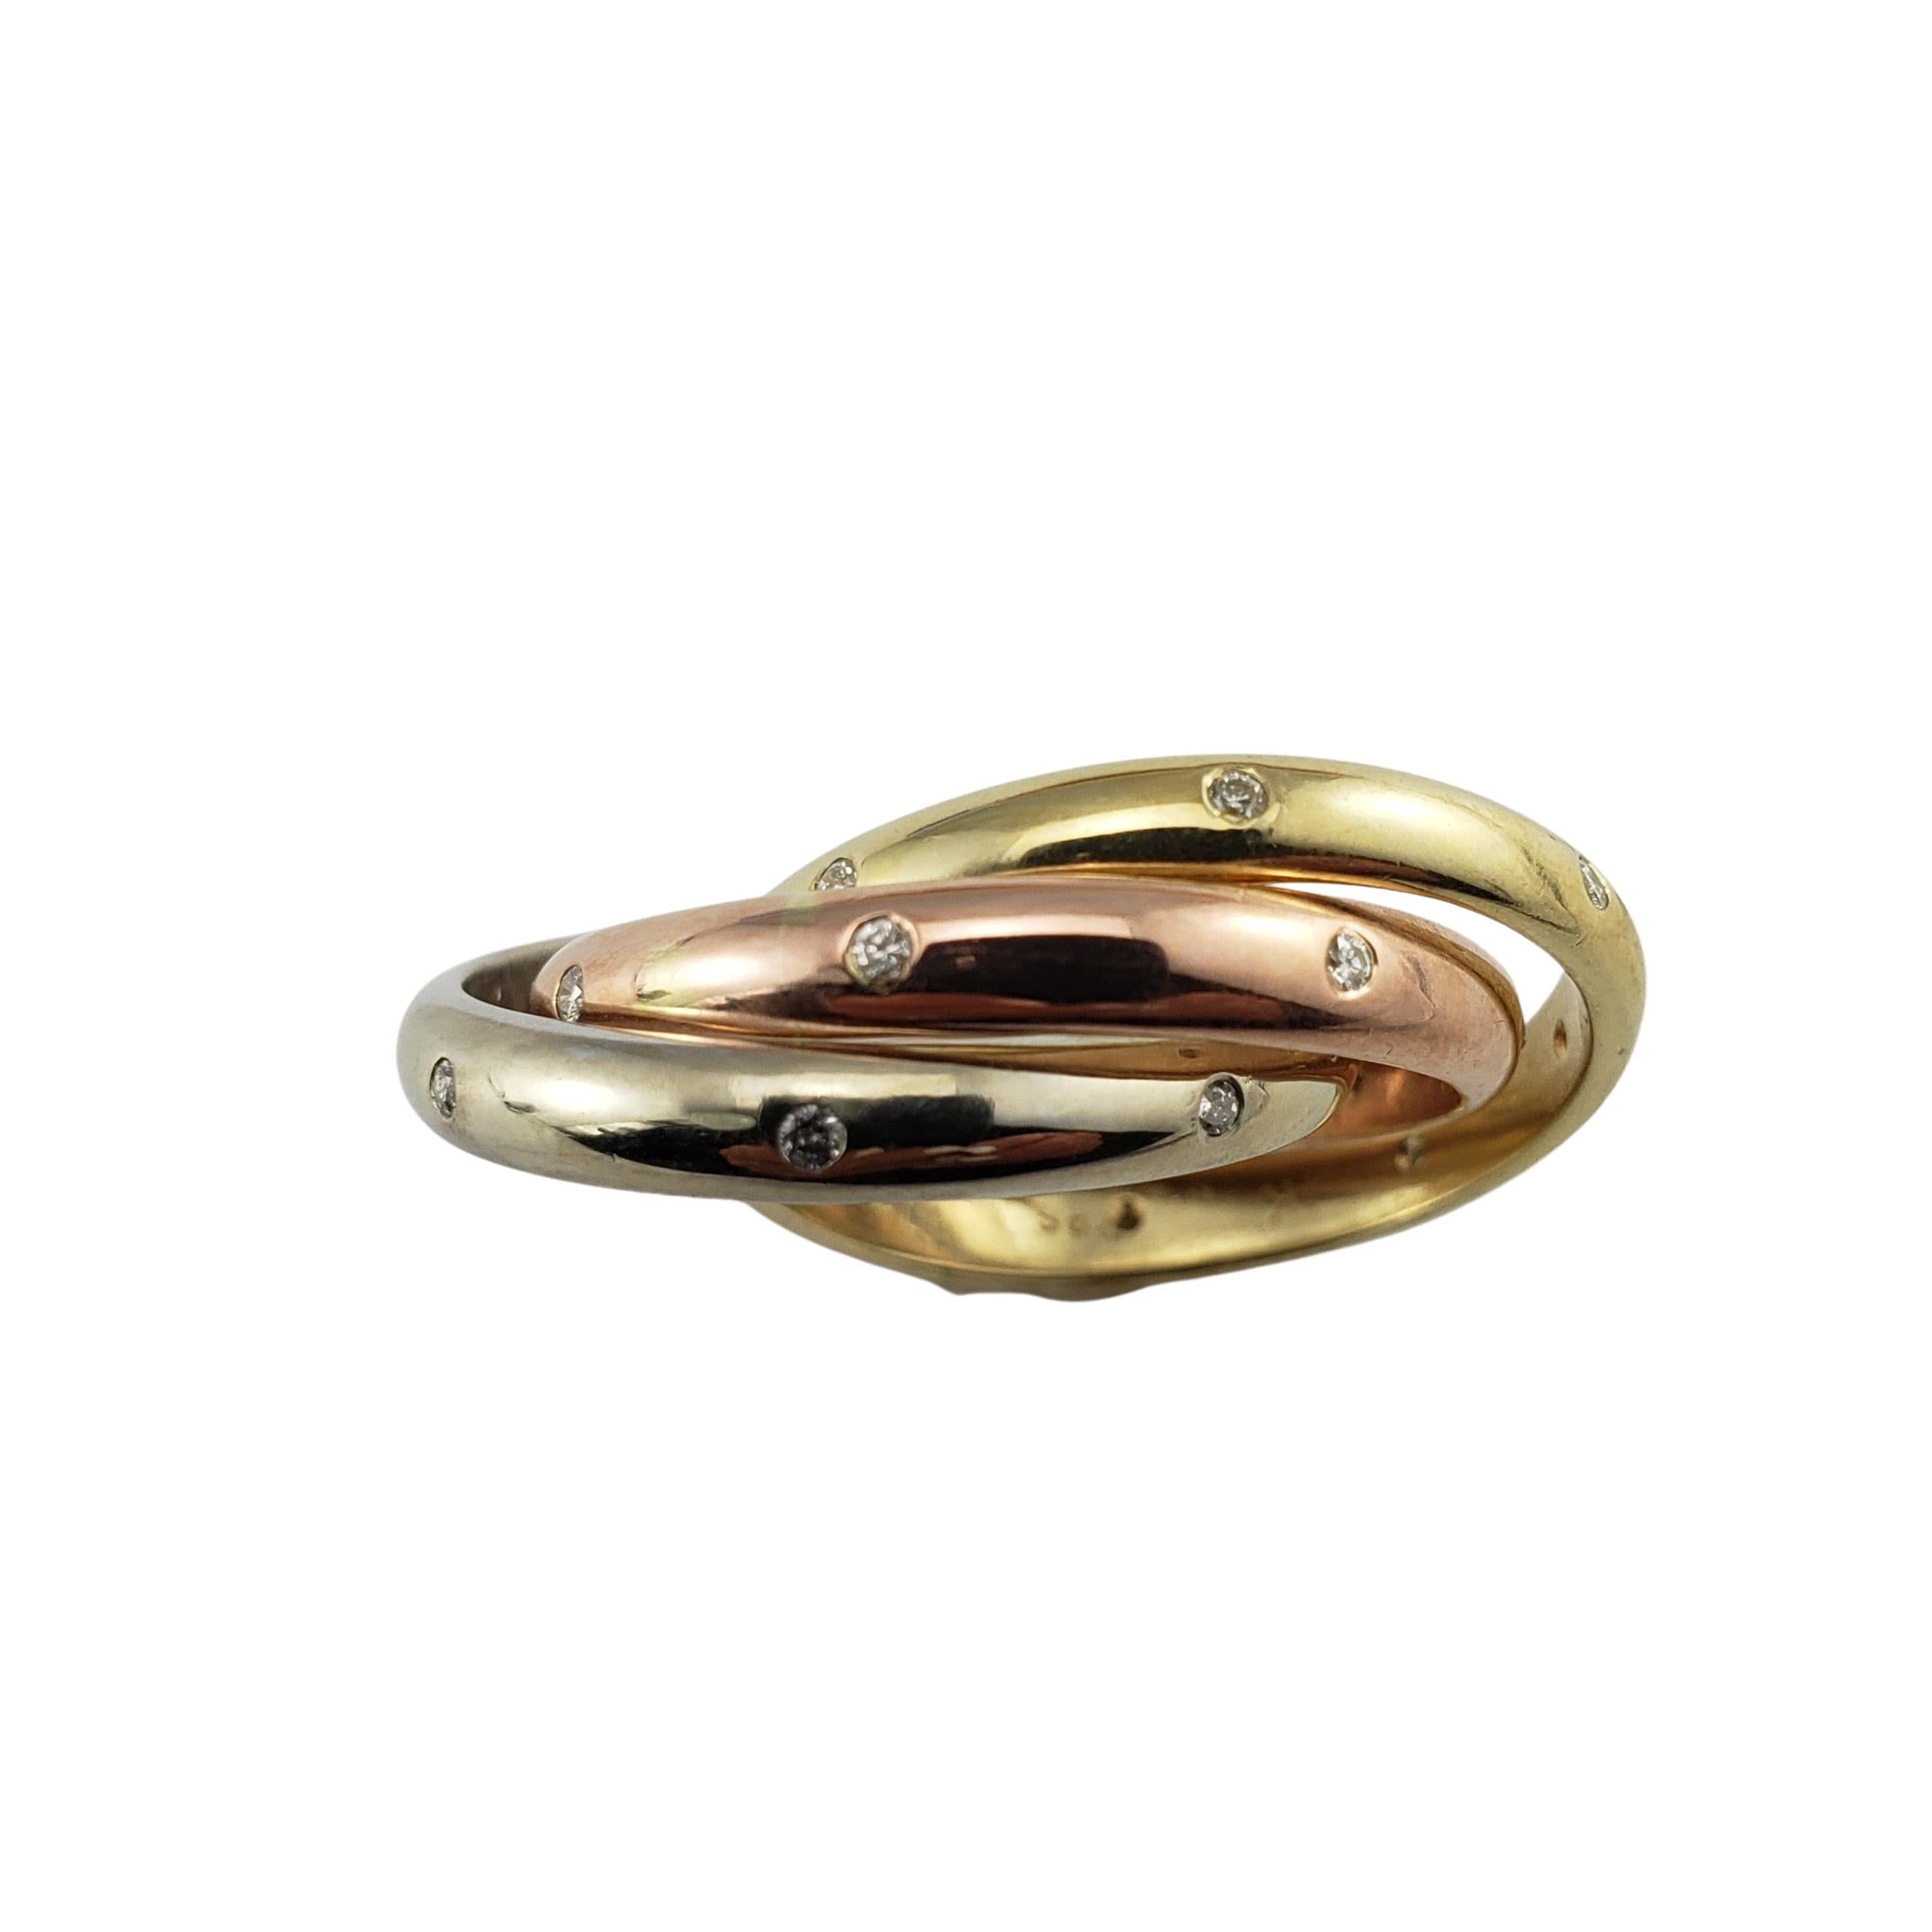 Vintage 14 Karat Tricolor Gold and Diamond Rolling Ring Size 7-

This elegant ring features three unfixed band in 14K yellow, white and rose gold that move together to slide on your finger. Each band is decorated with eight round brilliant cut